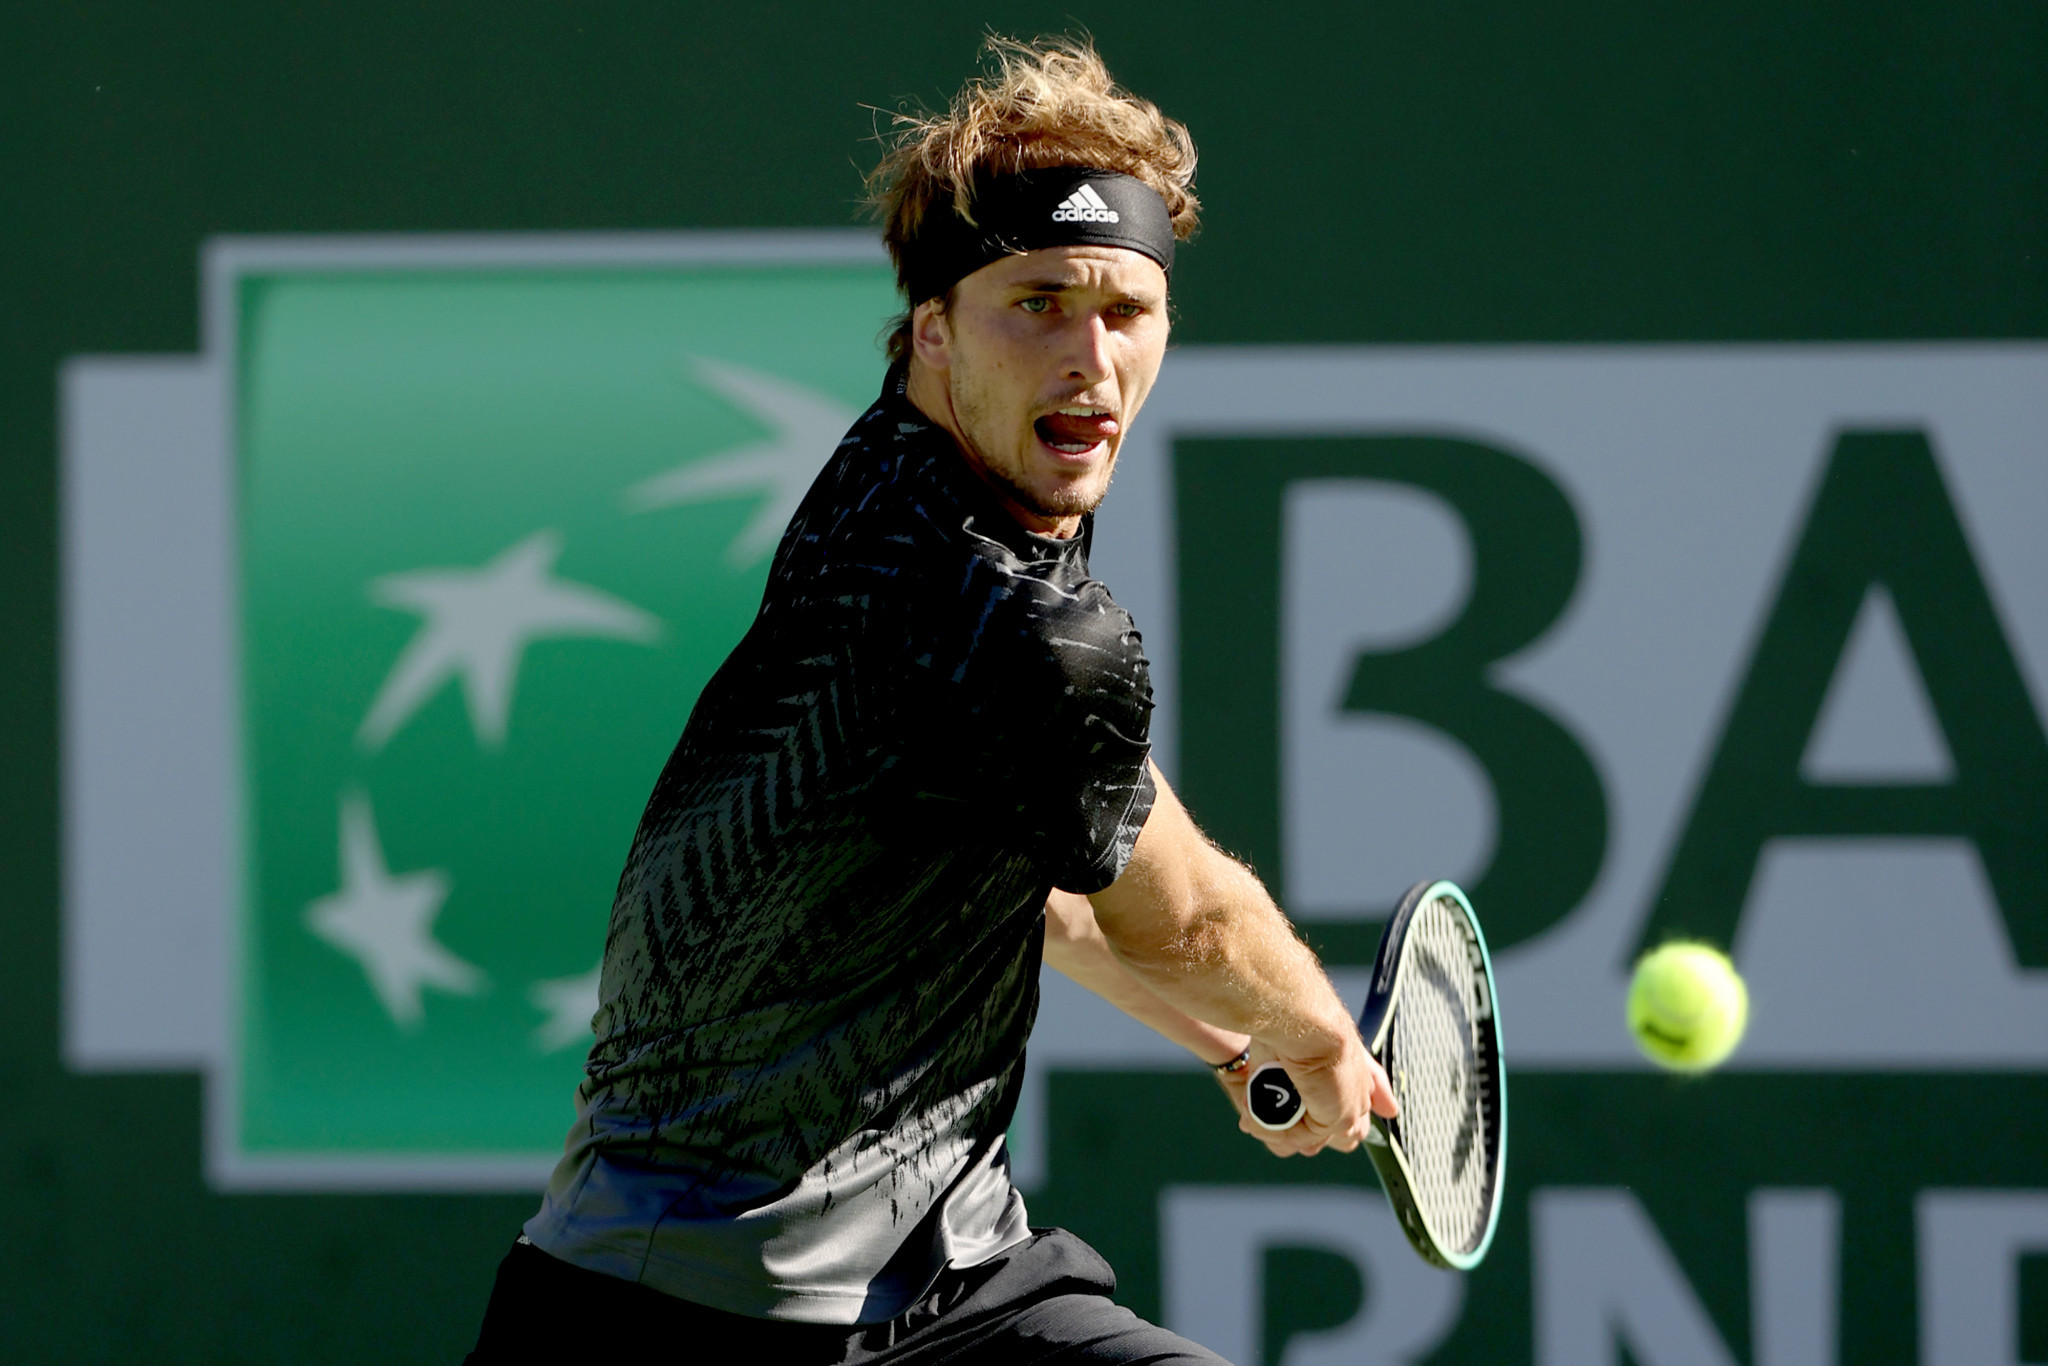 Tsitsipas and Zverev suffer men's singles Indian Wells Masters upsets and Azarenka reaches final for chance of third title